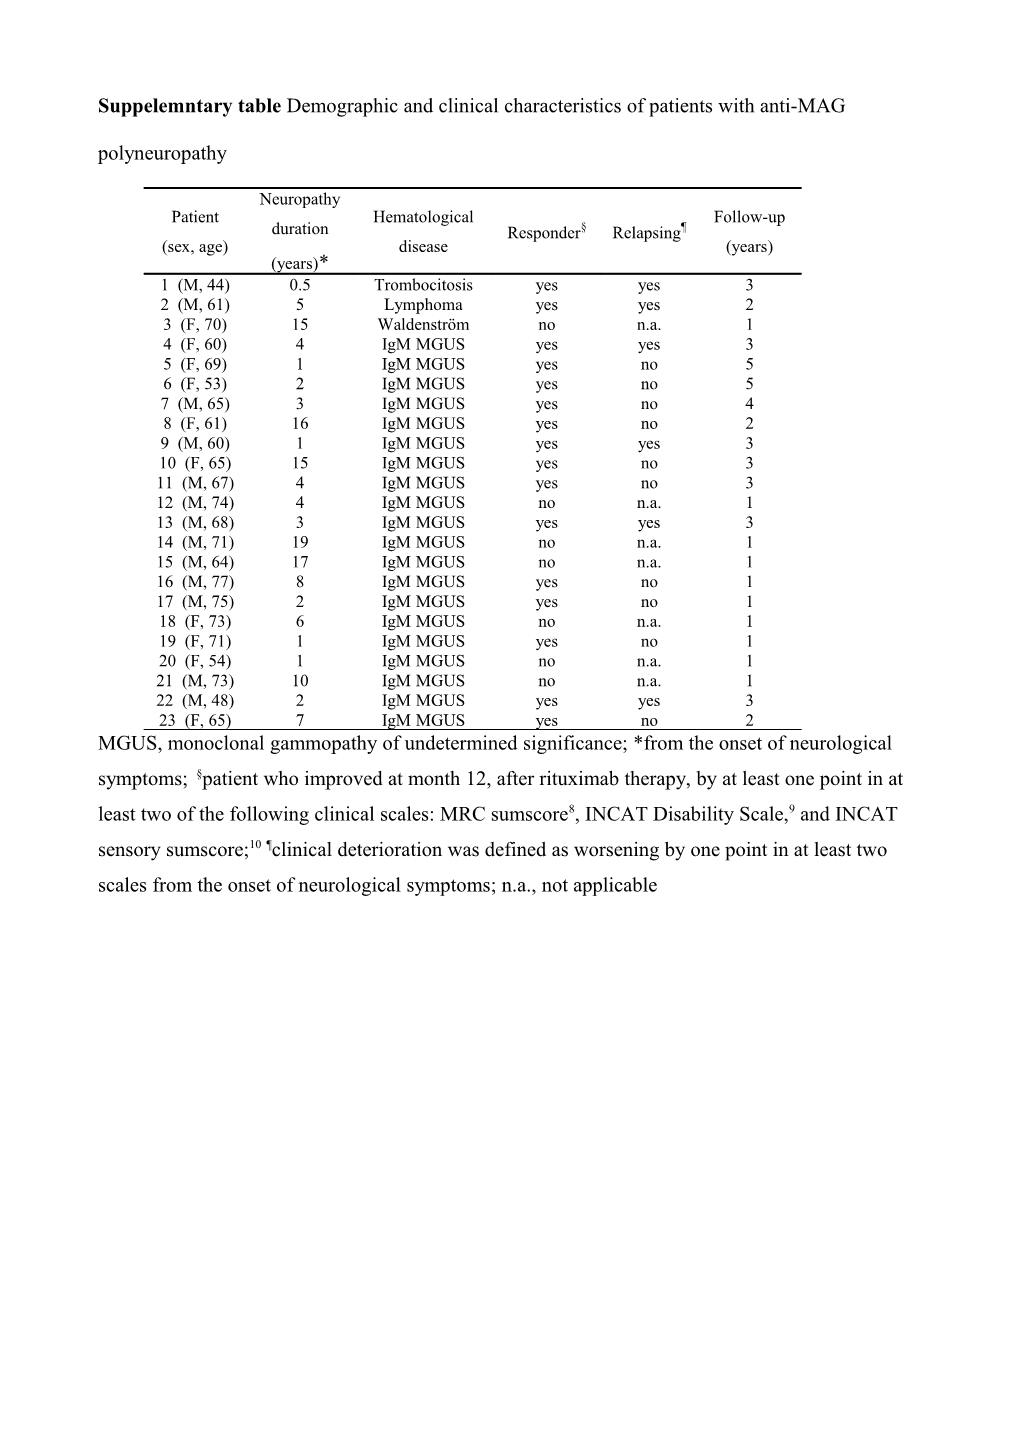 Suppelemntary Table Demographic and Clinical Characteristics of Patients with Anti-MAG